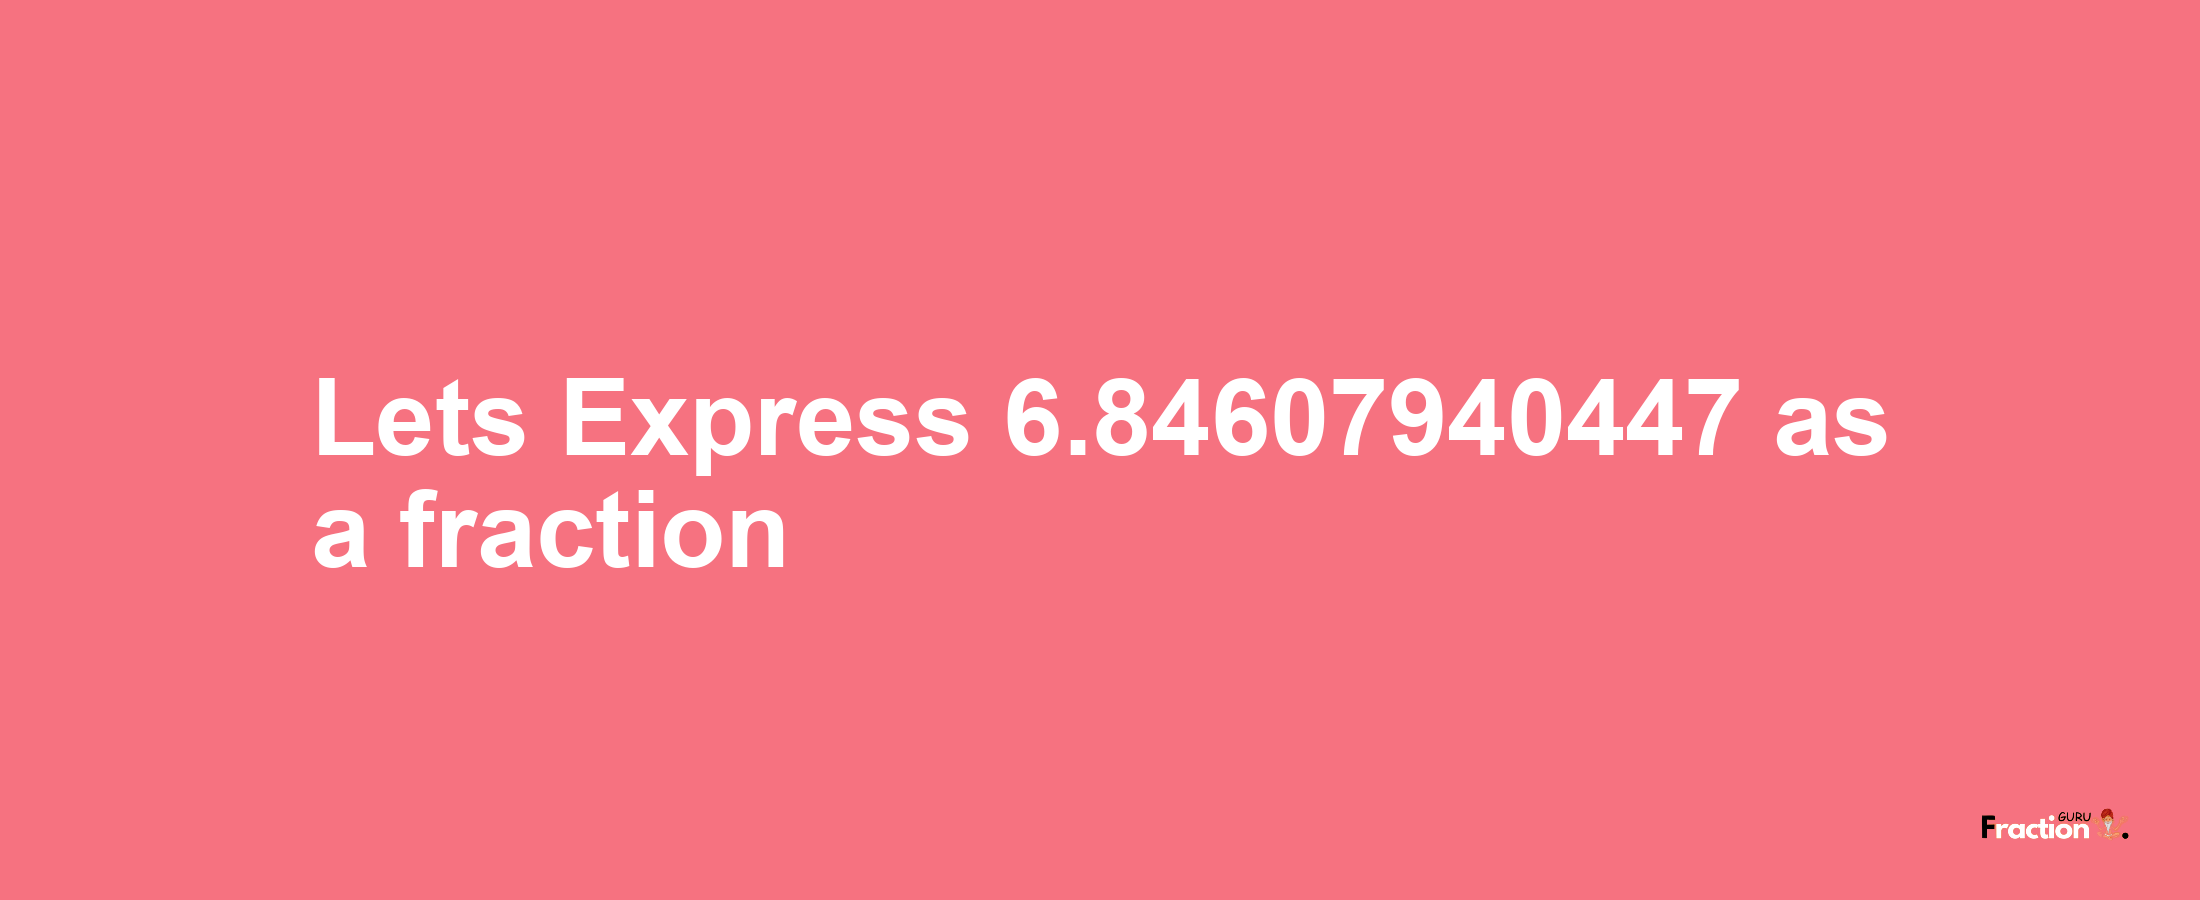 Lets Express 6.84607940447 as afraction